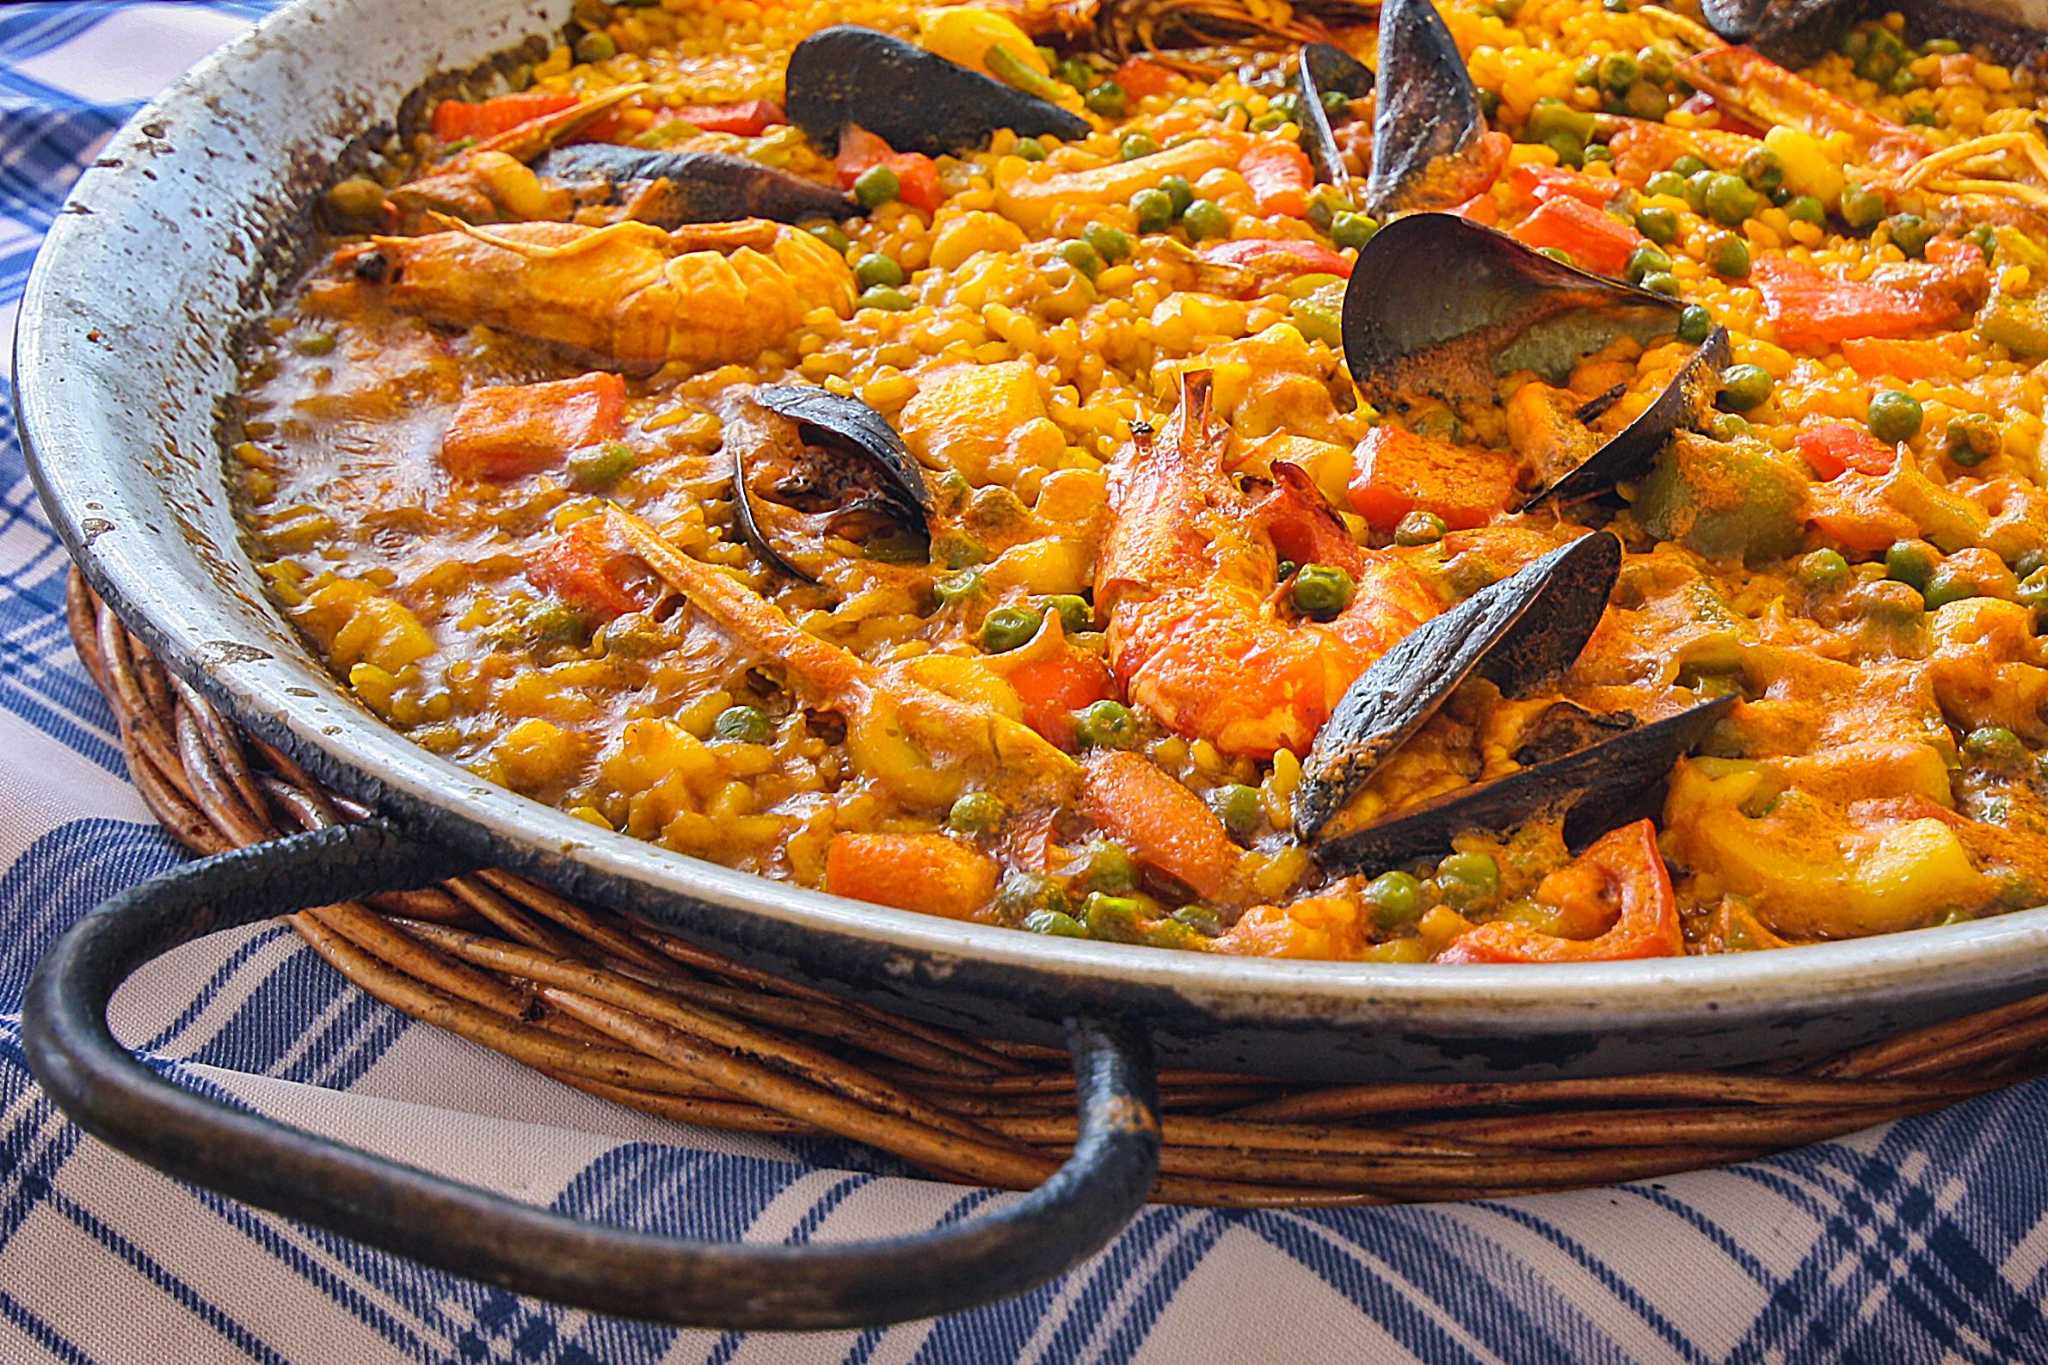 Paul’s Cooking Tips: How to use a paella pan for biscuits, stir fry, roasting chicken and more